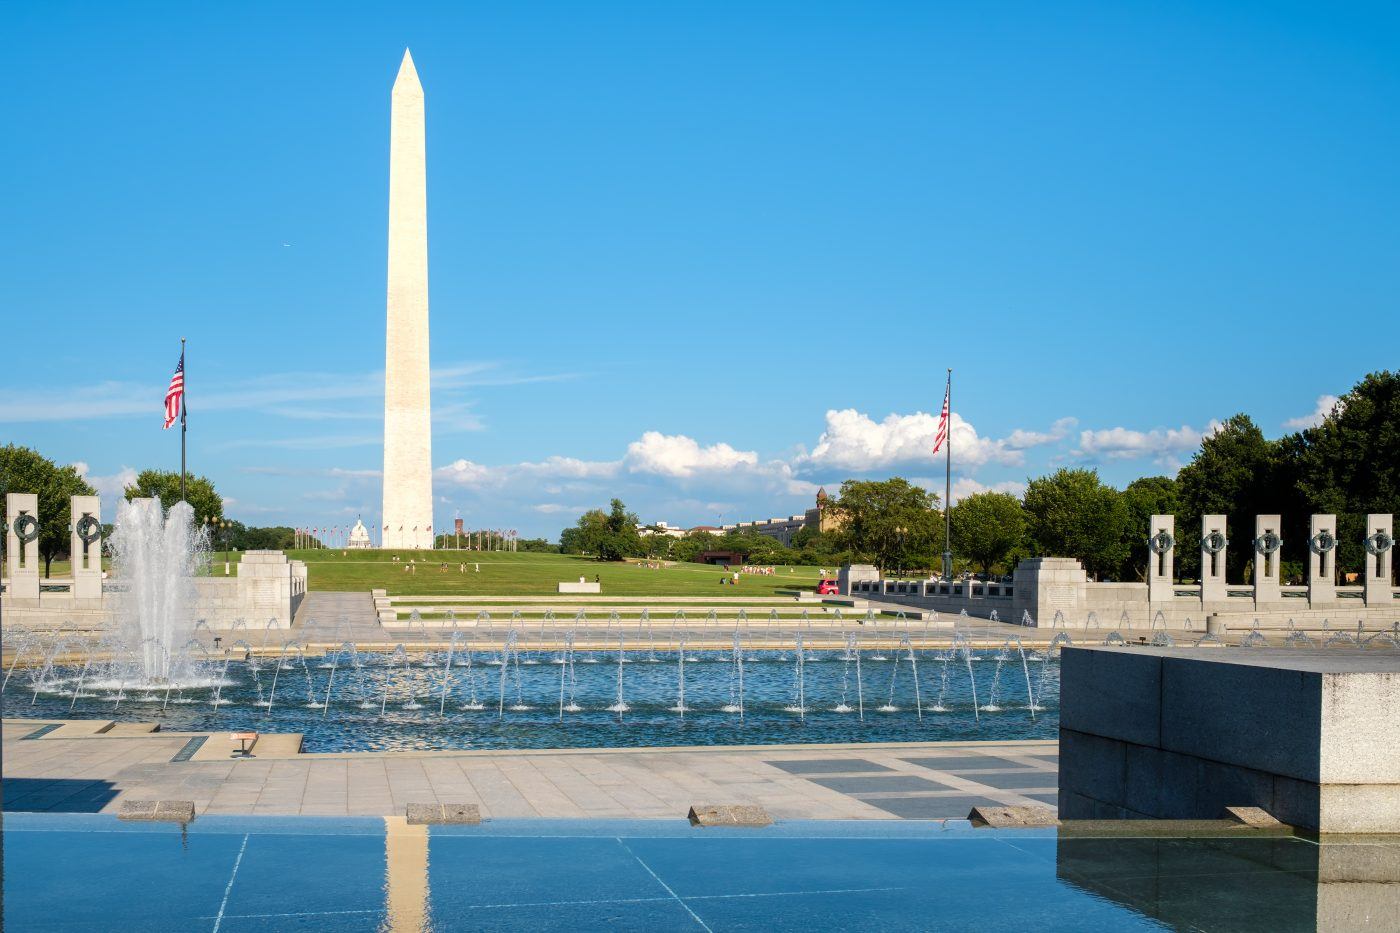 One of the best things to do in DC with kids is the Washington Monument and fountains on the National Mall